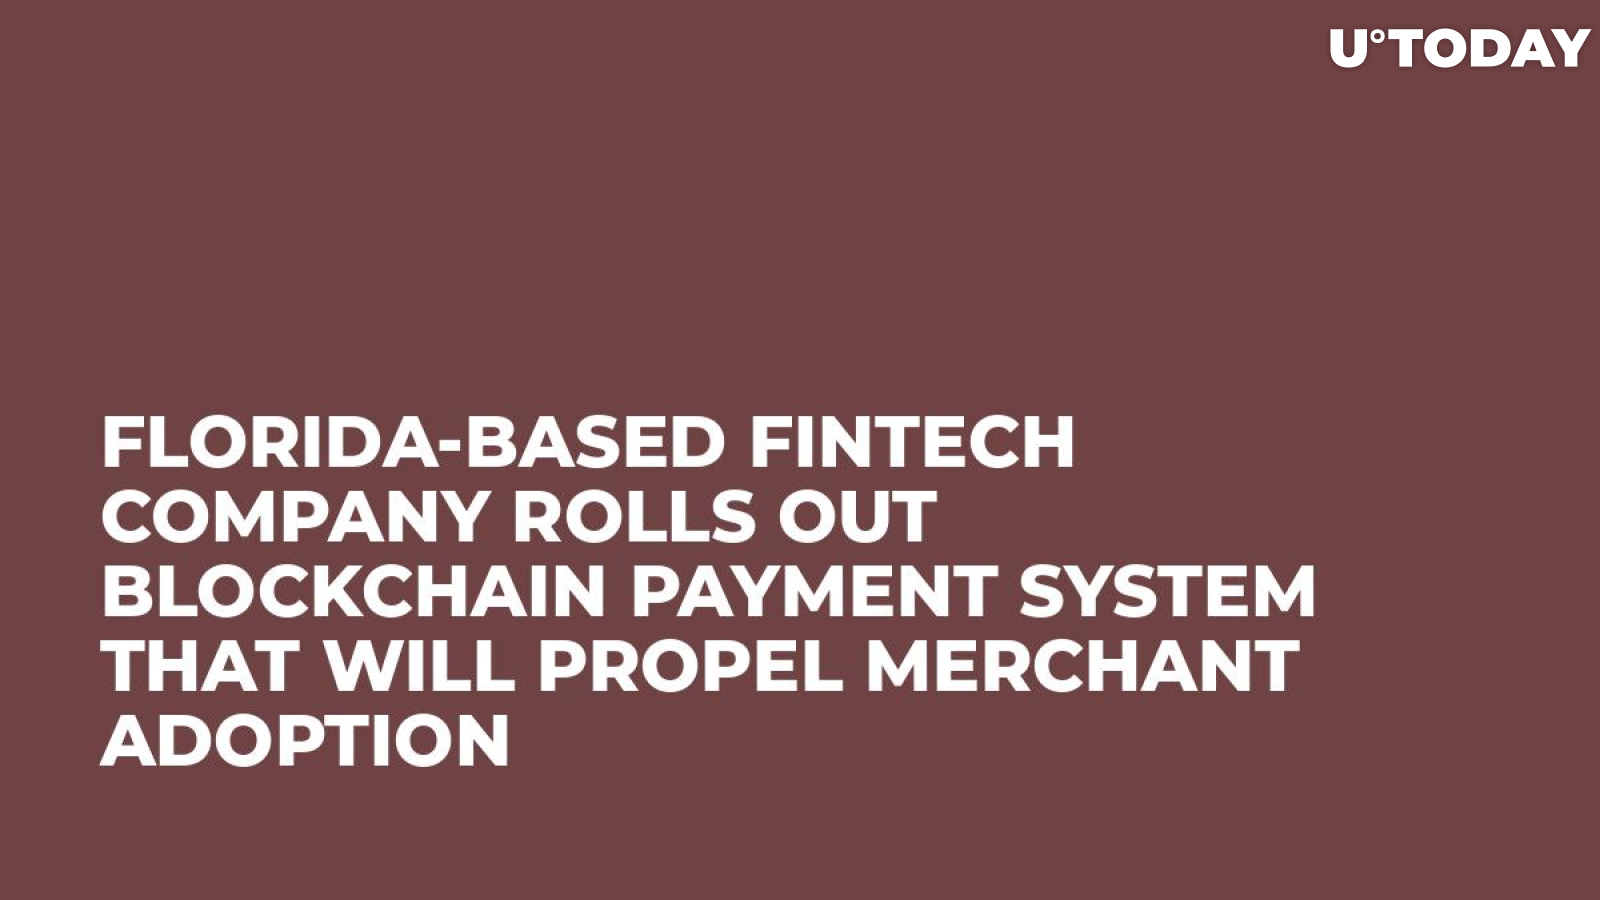 Florida-Based Fintech Company Rolls Out Blockchain Payment System That Will Propel Merchant Adoption  